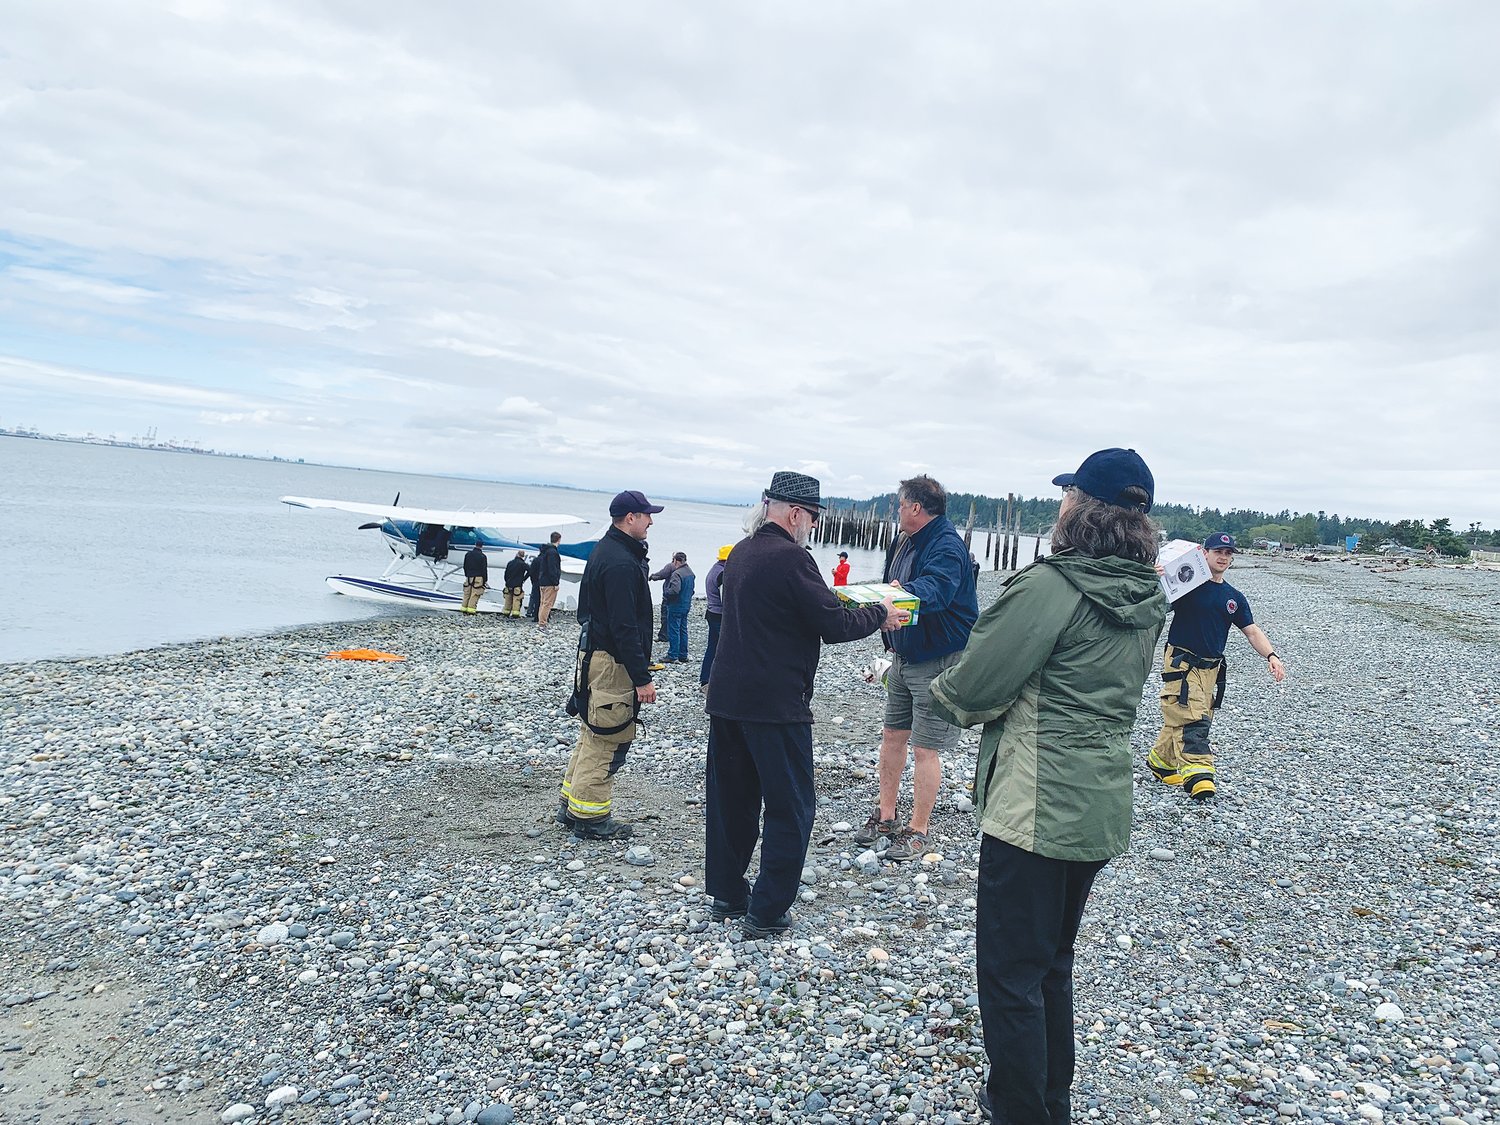 On June 18, Point Roberts Emergency Preparedness (PREP) hosted the Emergency Volunteer Air Corps and Disaster Airlift Response Team for their codenamed “Thunder Run” fly-in which brought in 800 pounds of food and supplies to Point Roberts and an additional 60,000 lbs. of food to other locations in Washington and Oregon.